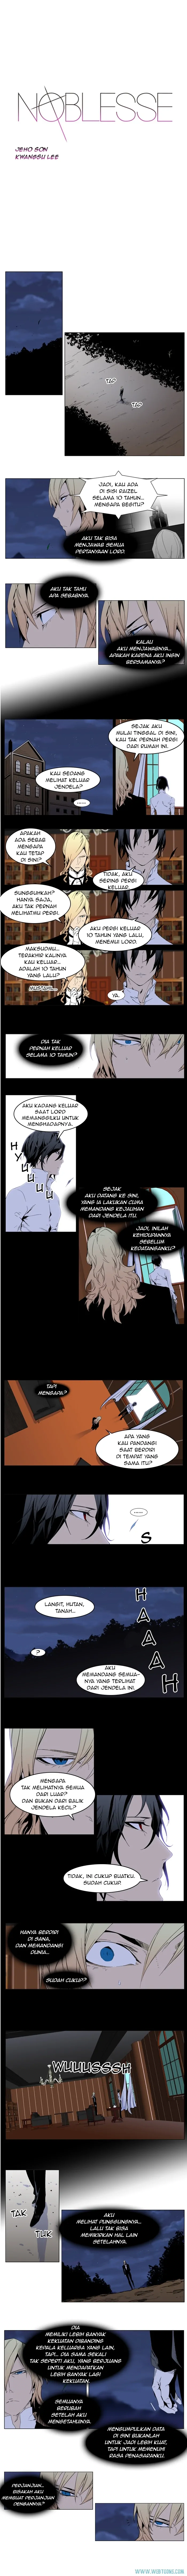 Noblesse Chapter 289 - 19